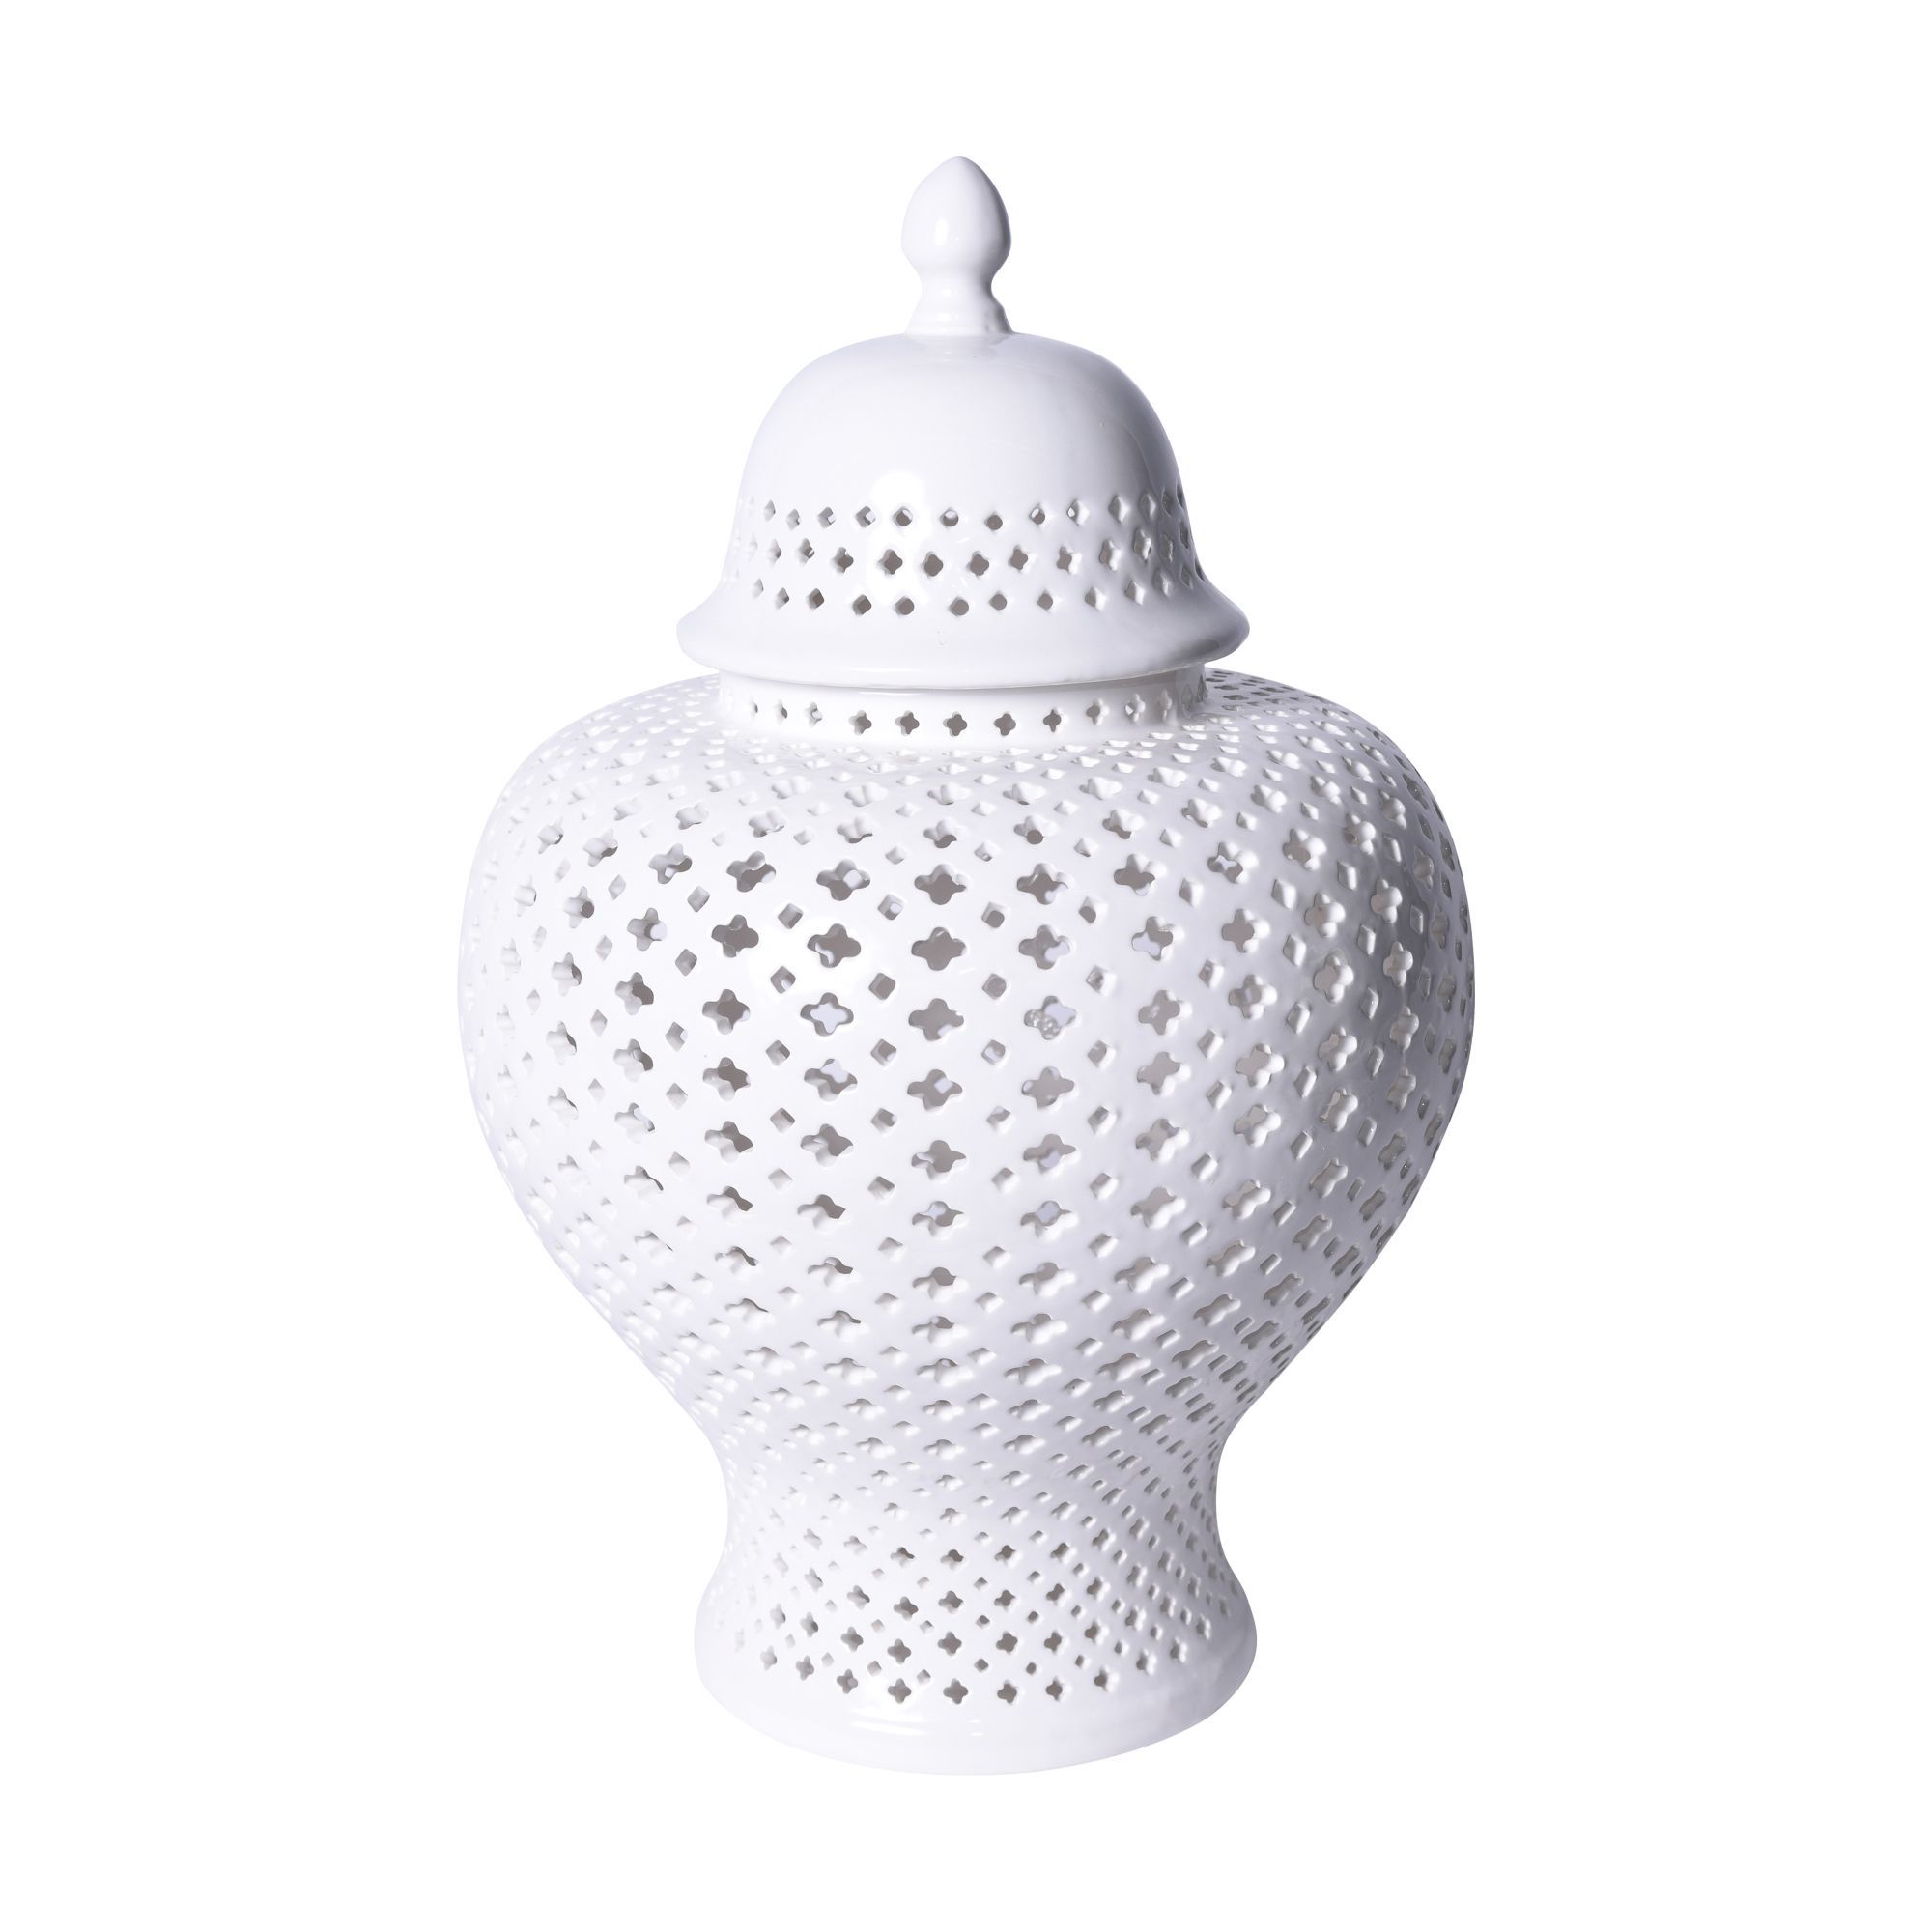 Legend of Asia Giftware Legend of Asia White Lattice Ginger Jar With Lid - L